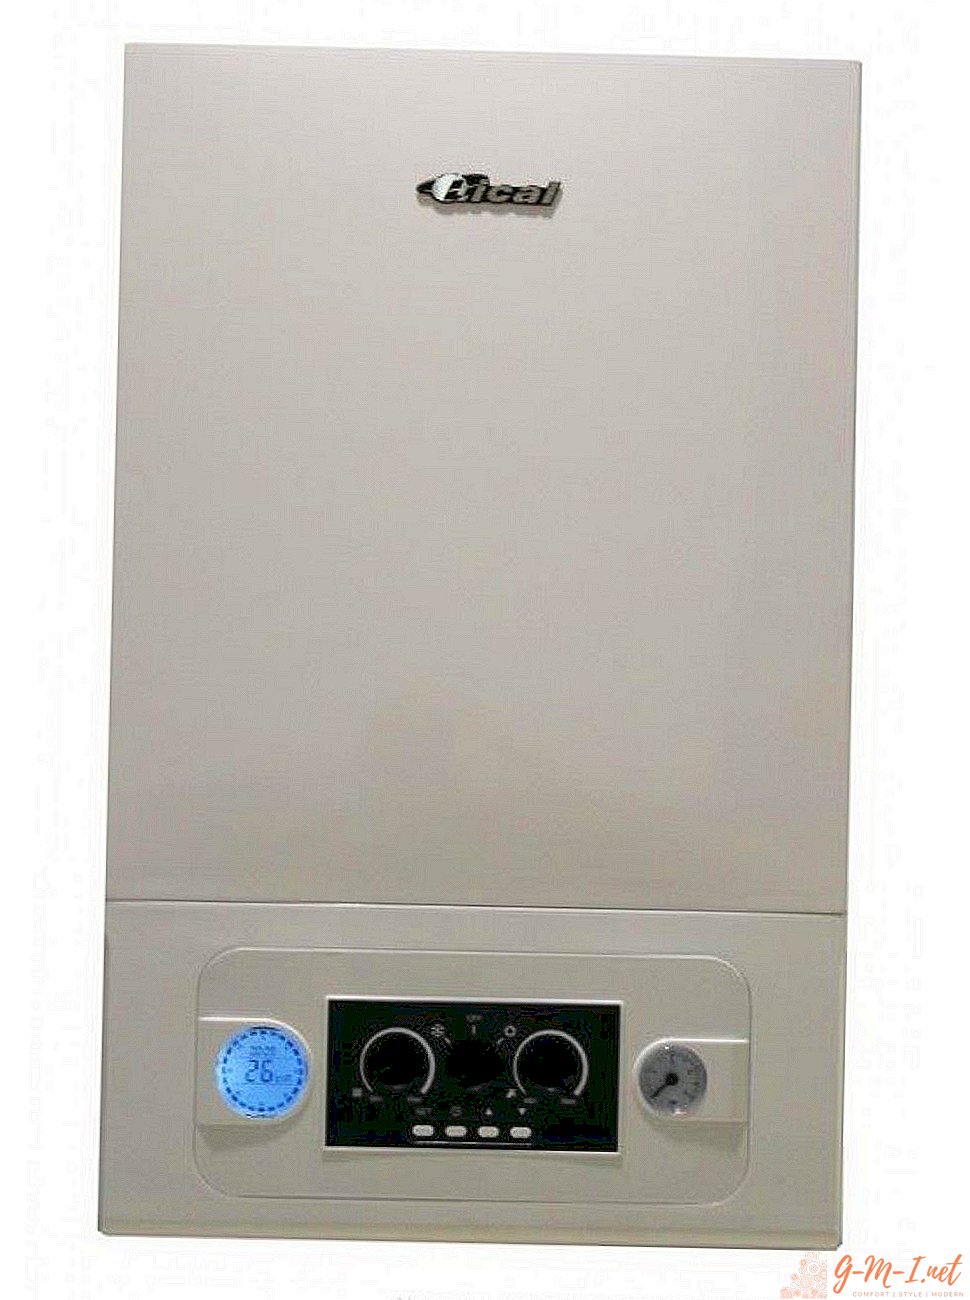 How to use a gas boiler